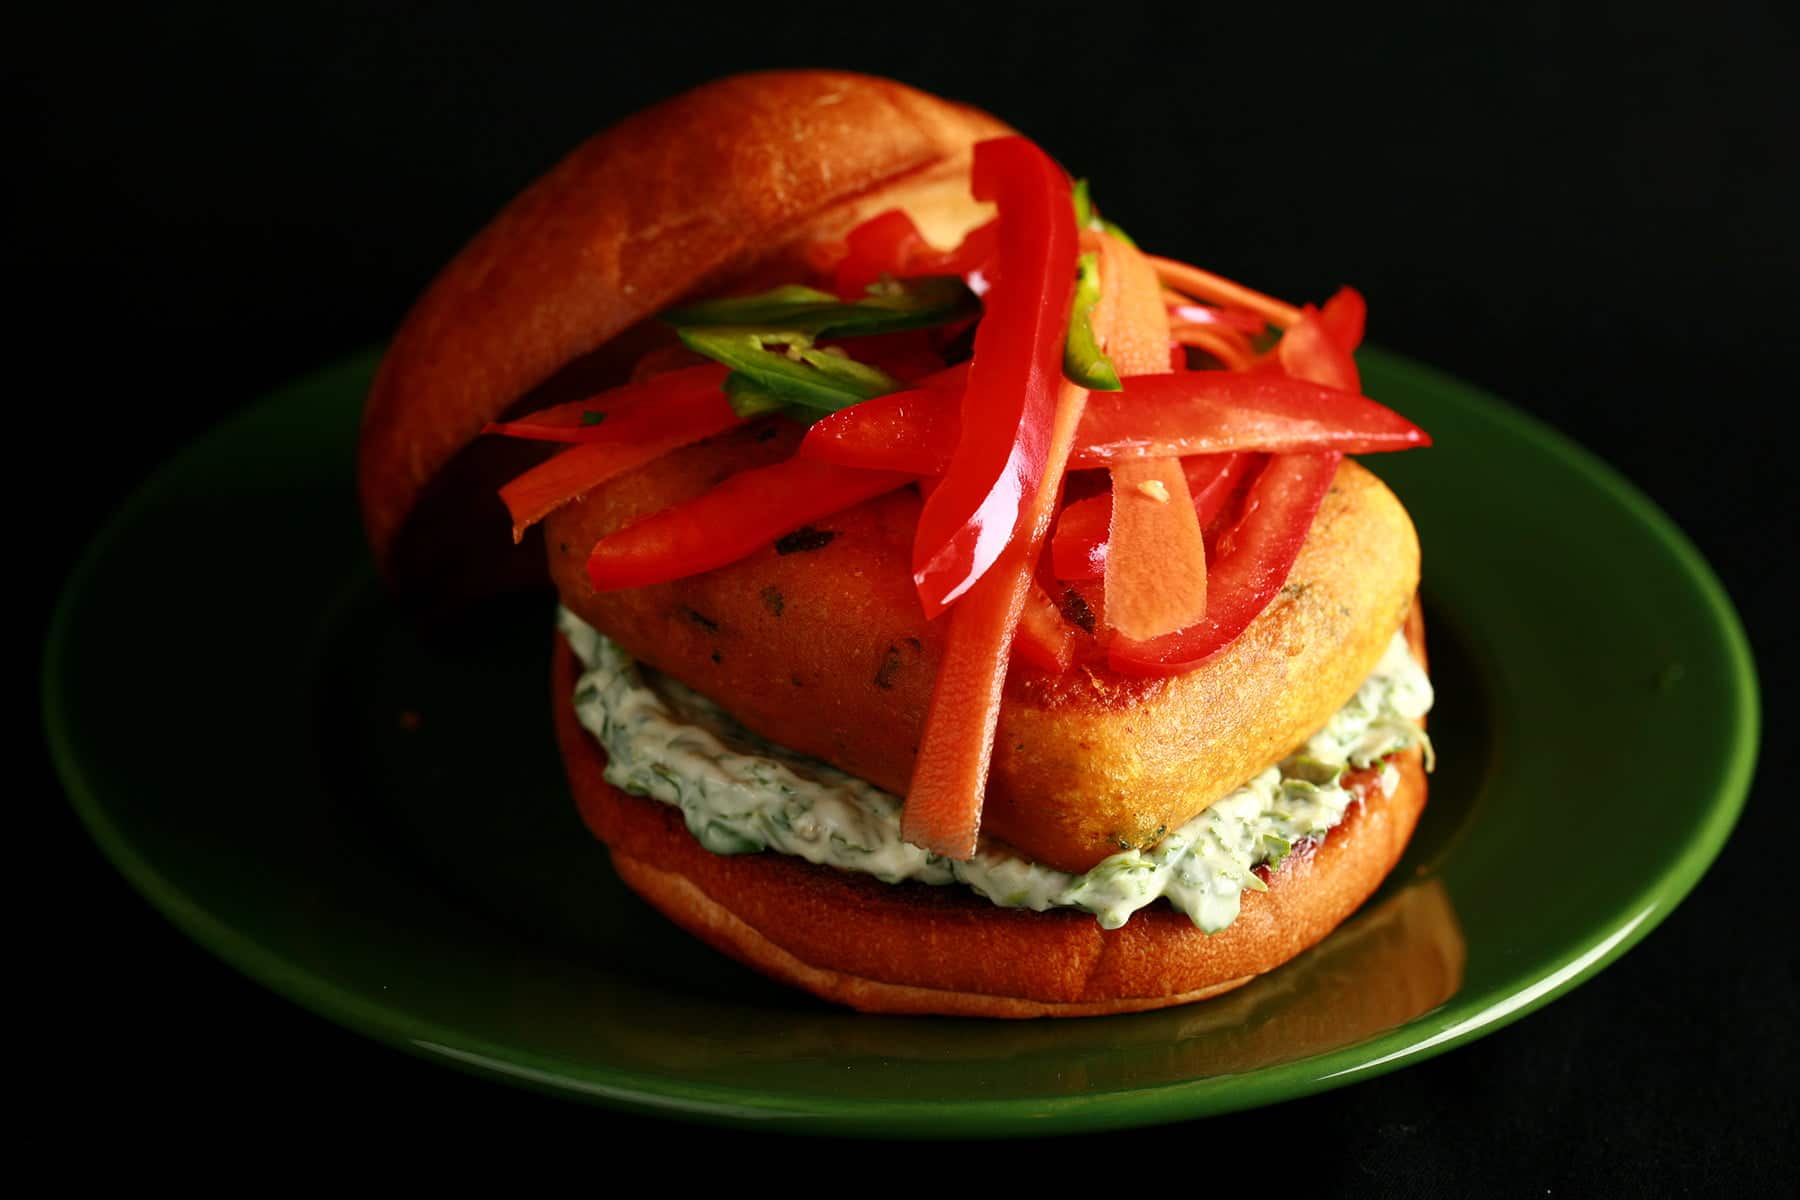 A very close up view of a paneer burger - a pakora battered patty of paneer, with cilantro-mint mayonnaise and a pickled slaw made of red peppers, carrots, and jalapenos, on a bun.